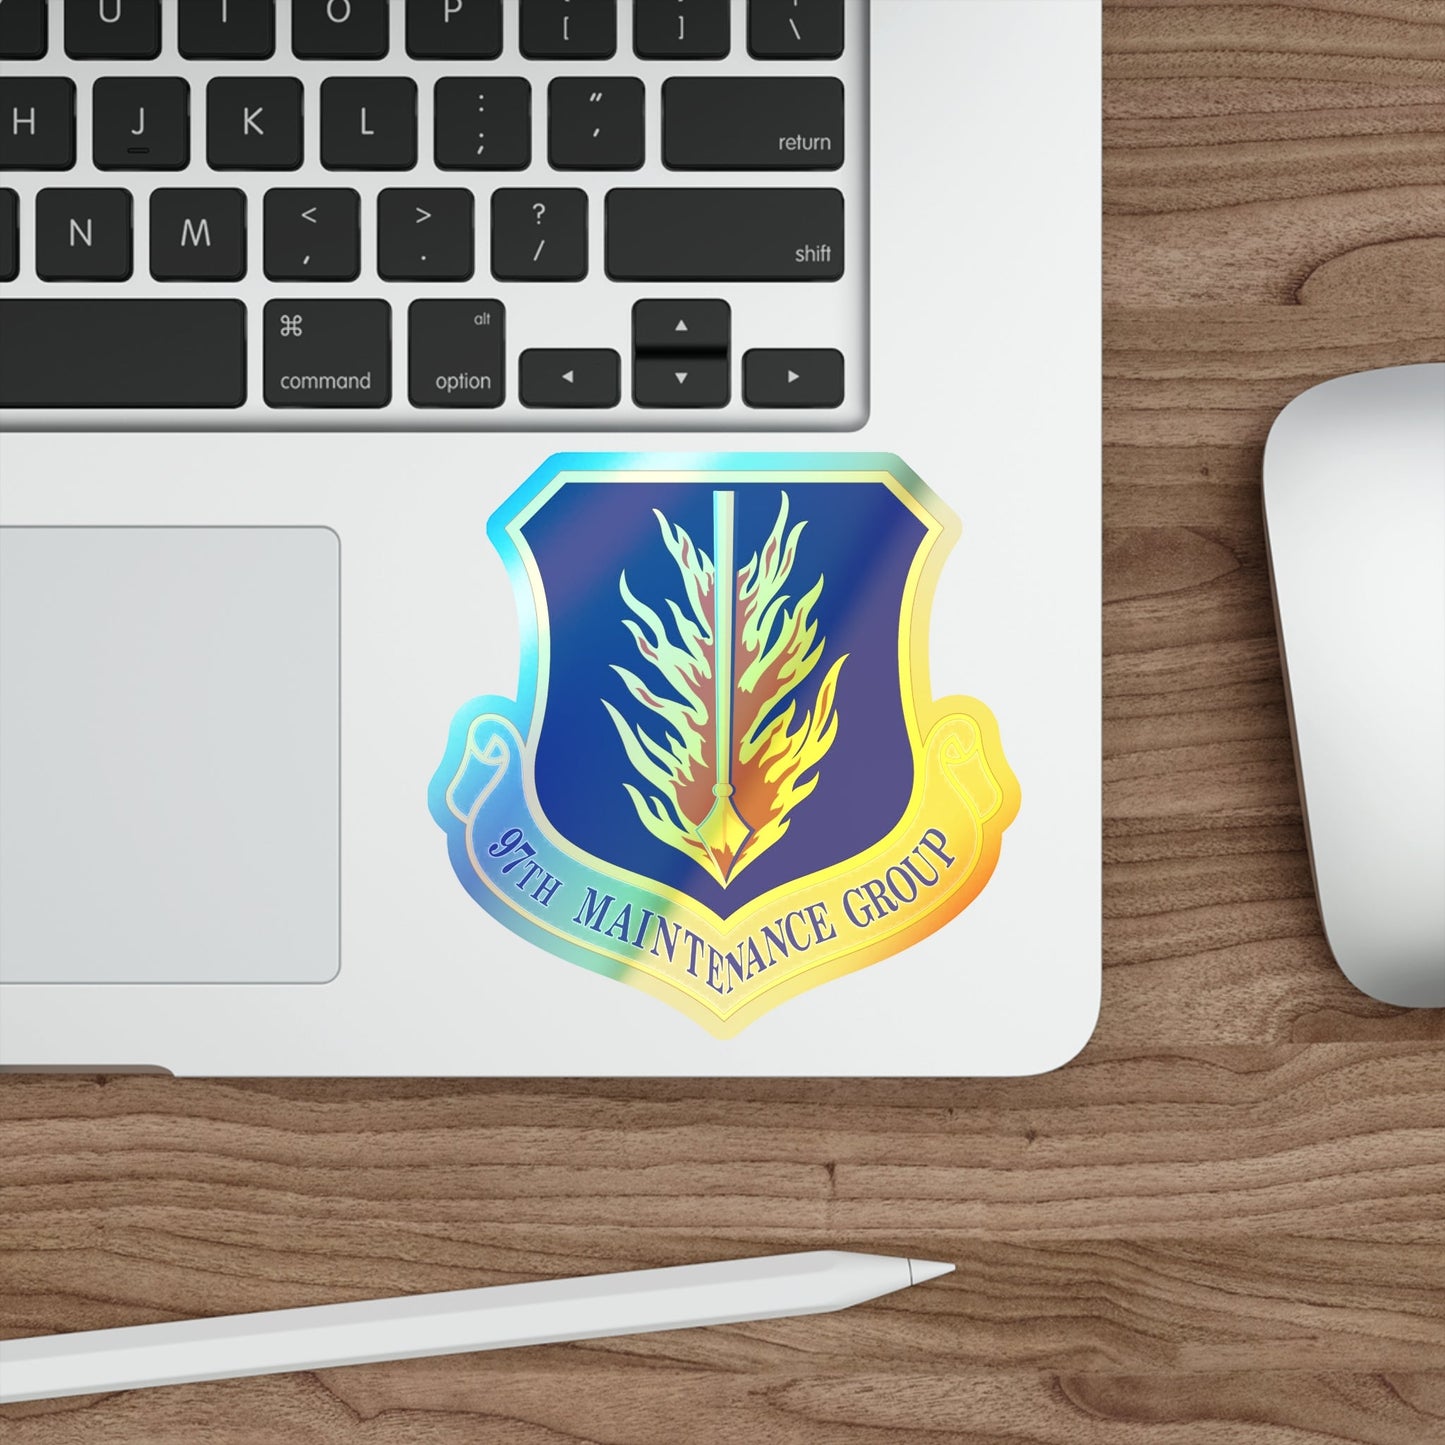 97 Maintenance Group AETC (U.S. Air Force) Holographic STICKER Die-Cut Vinyl Decal-The Sticker Space